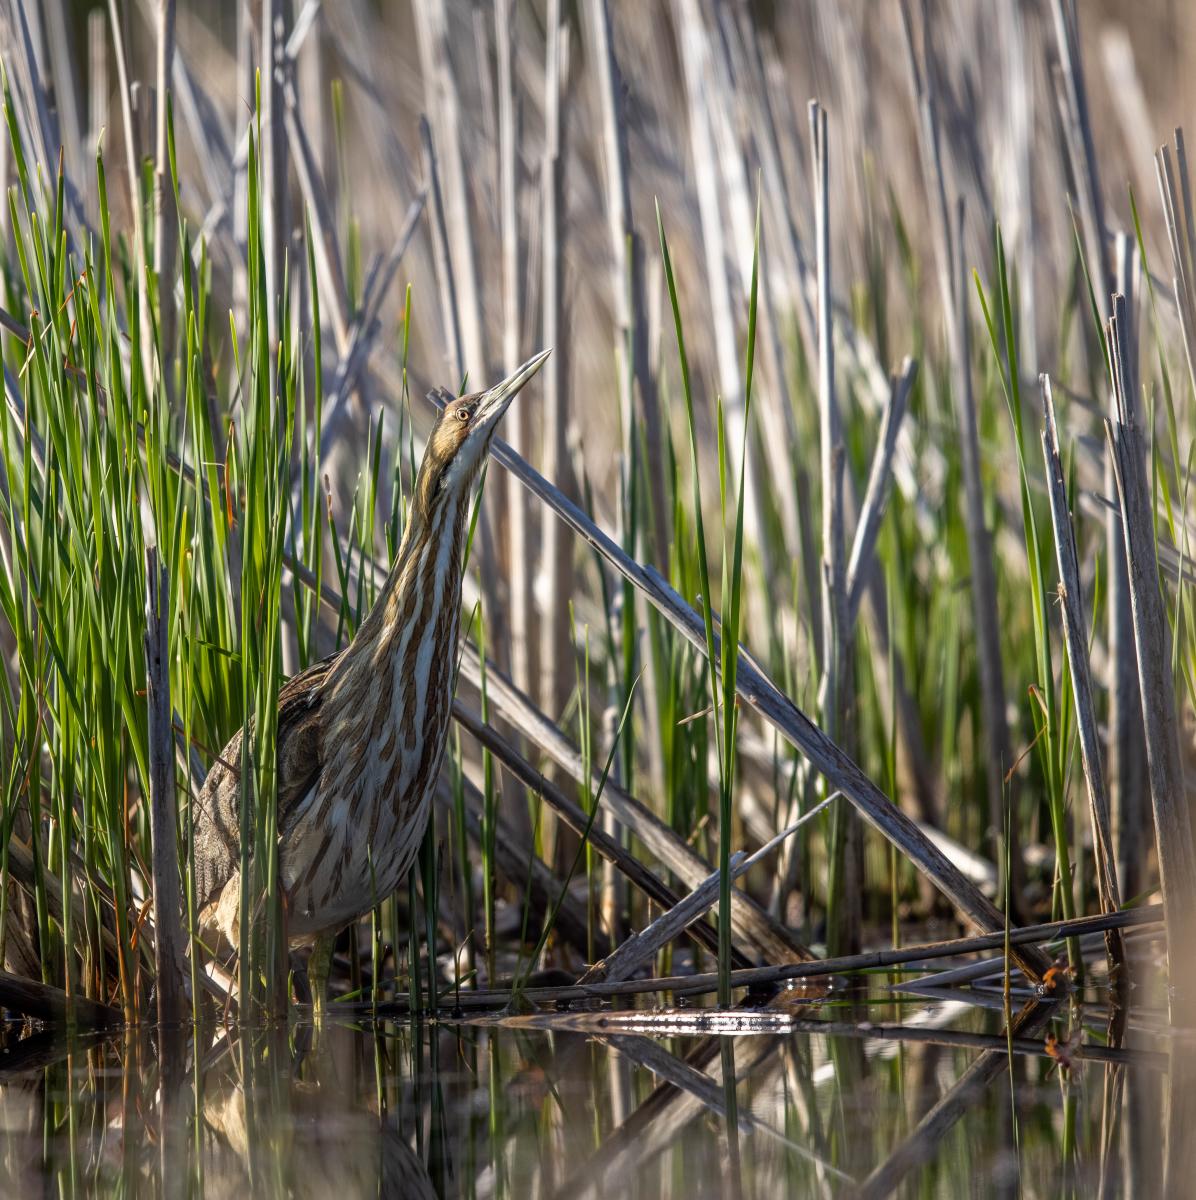 Vegetation stands in low water. A brown and white striped bird tries to camouflage itself